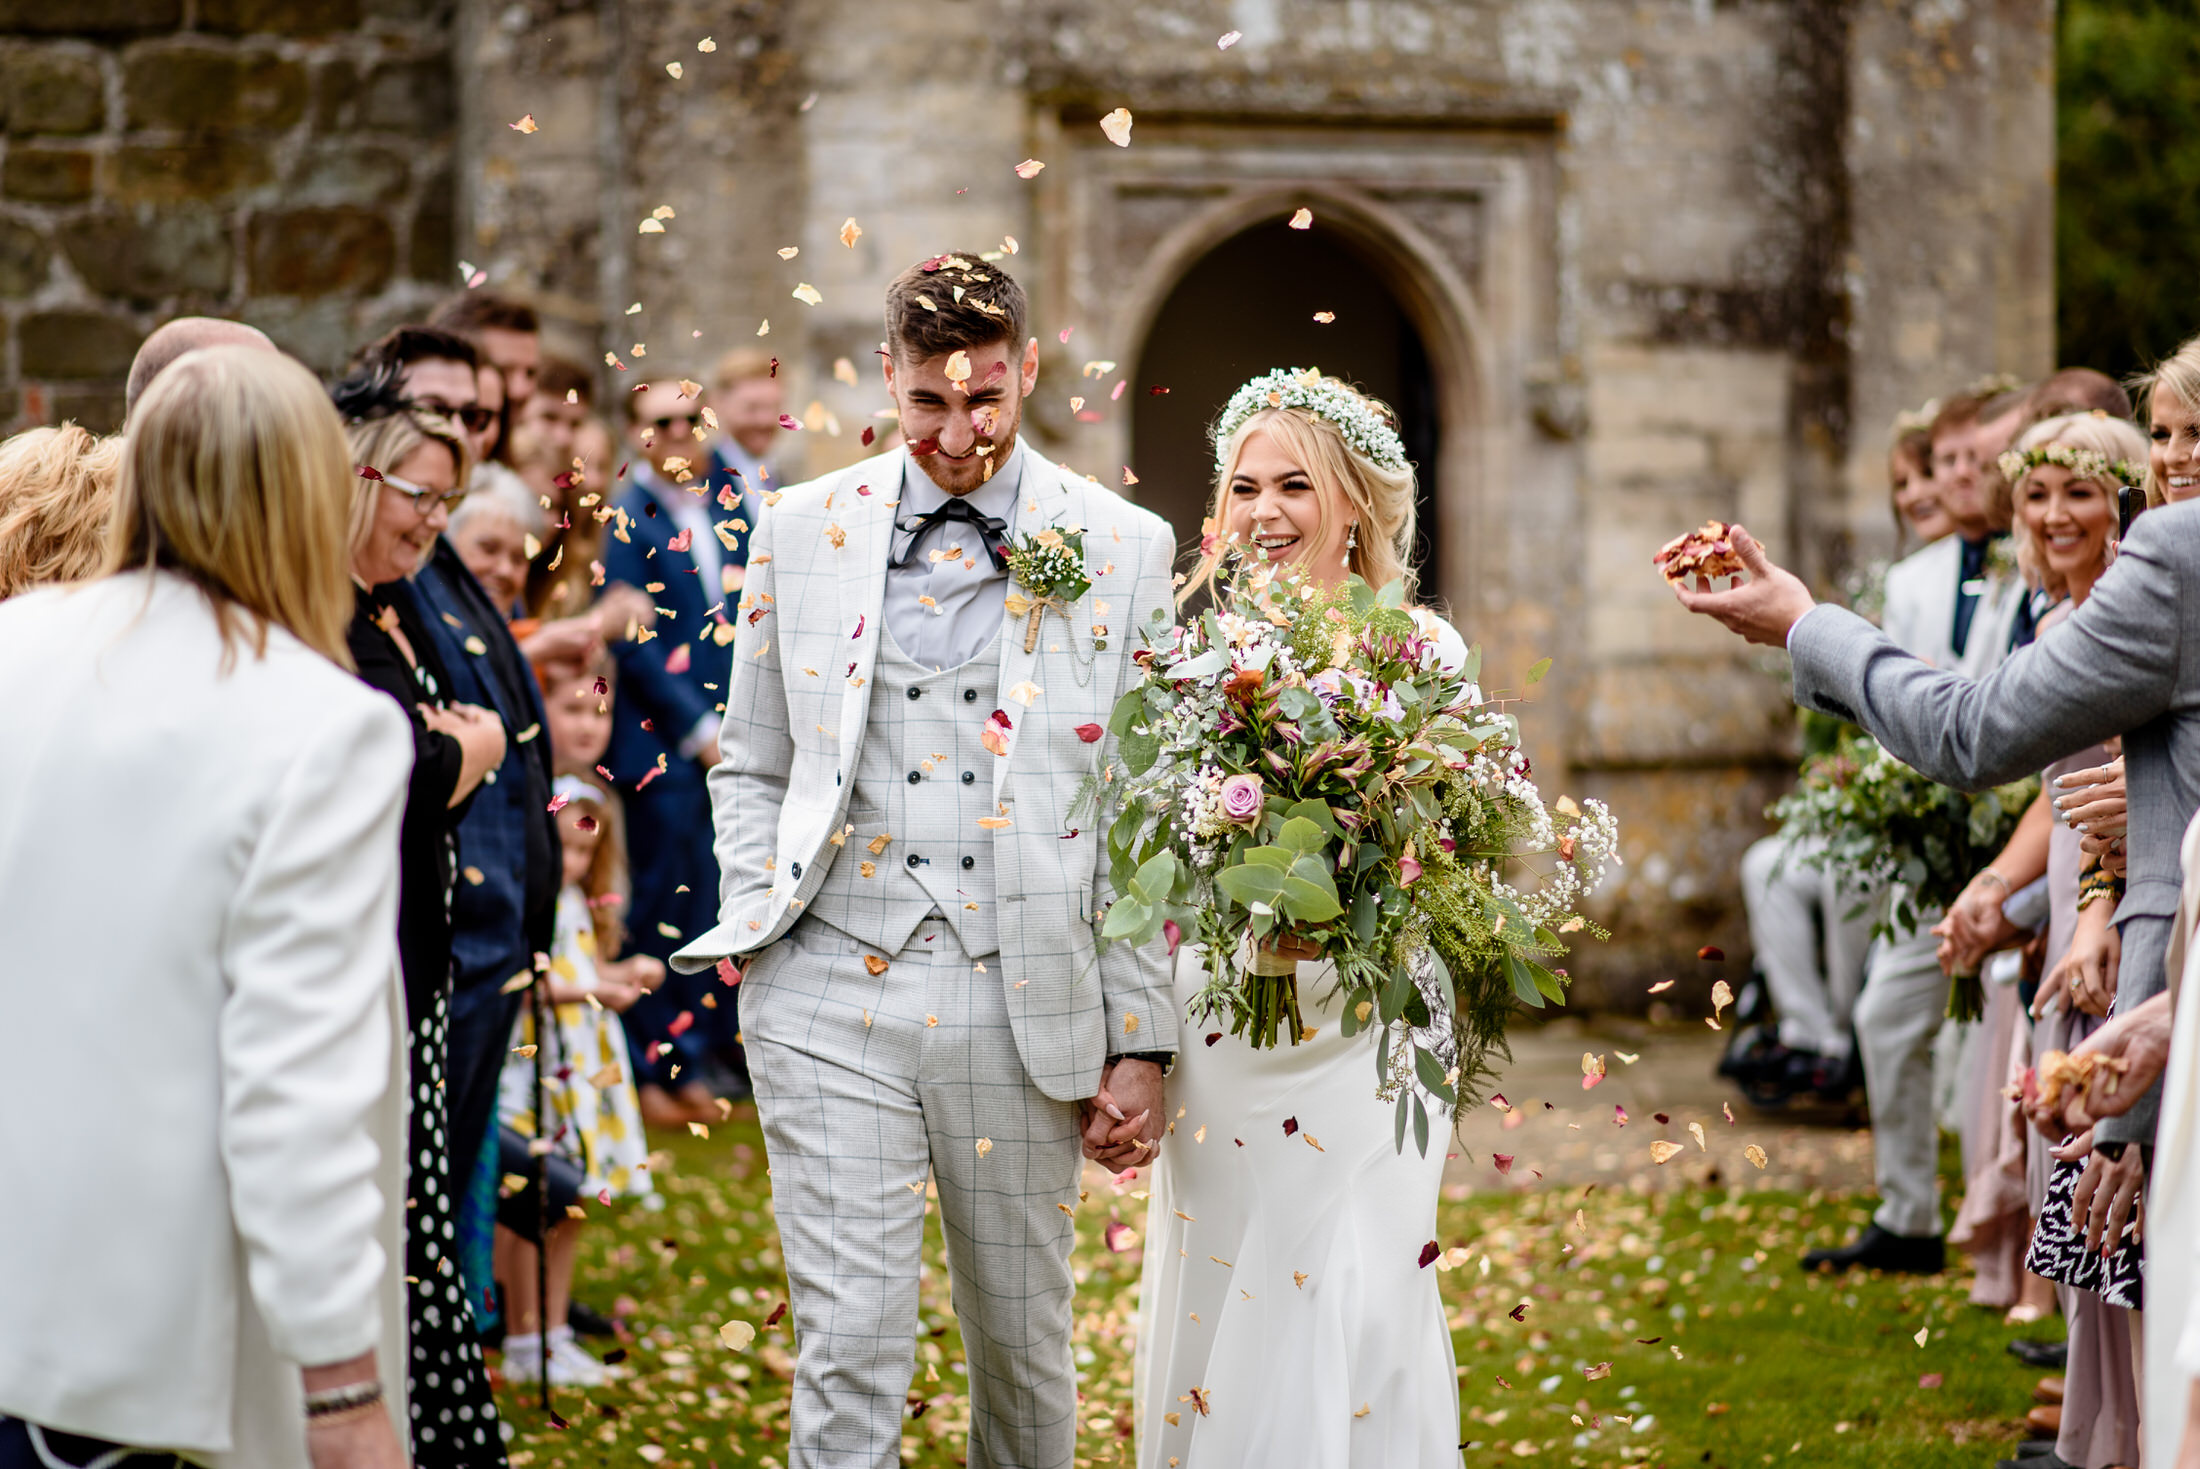 A wedding couple walking down the aisle at Scrivelsby Walled Garden, with confetti thrown at them.